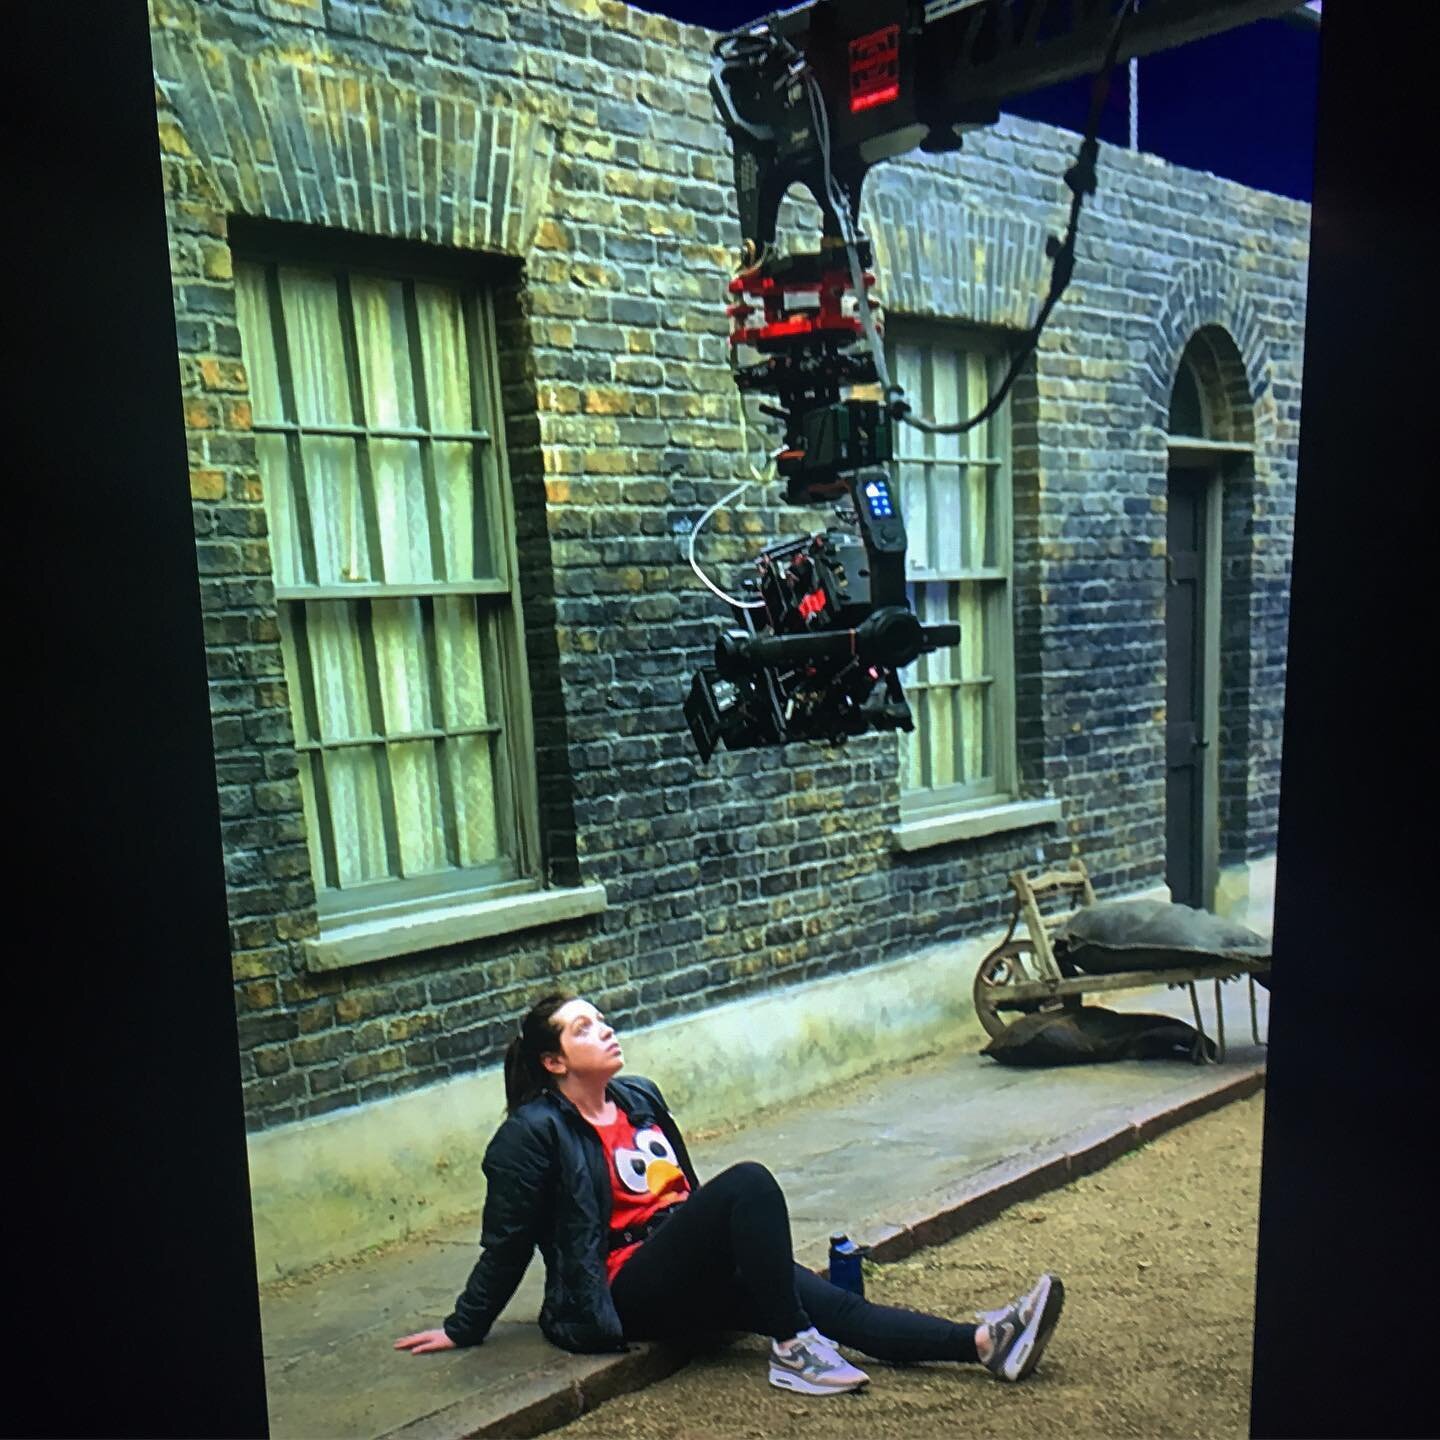 The Aeronauts is now out in cinemas! 🎈🎉🙌 And here is one of my favourite behind the scenes photo of me: sat on a street, lining up a shot, in an Elmo t-shirt.